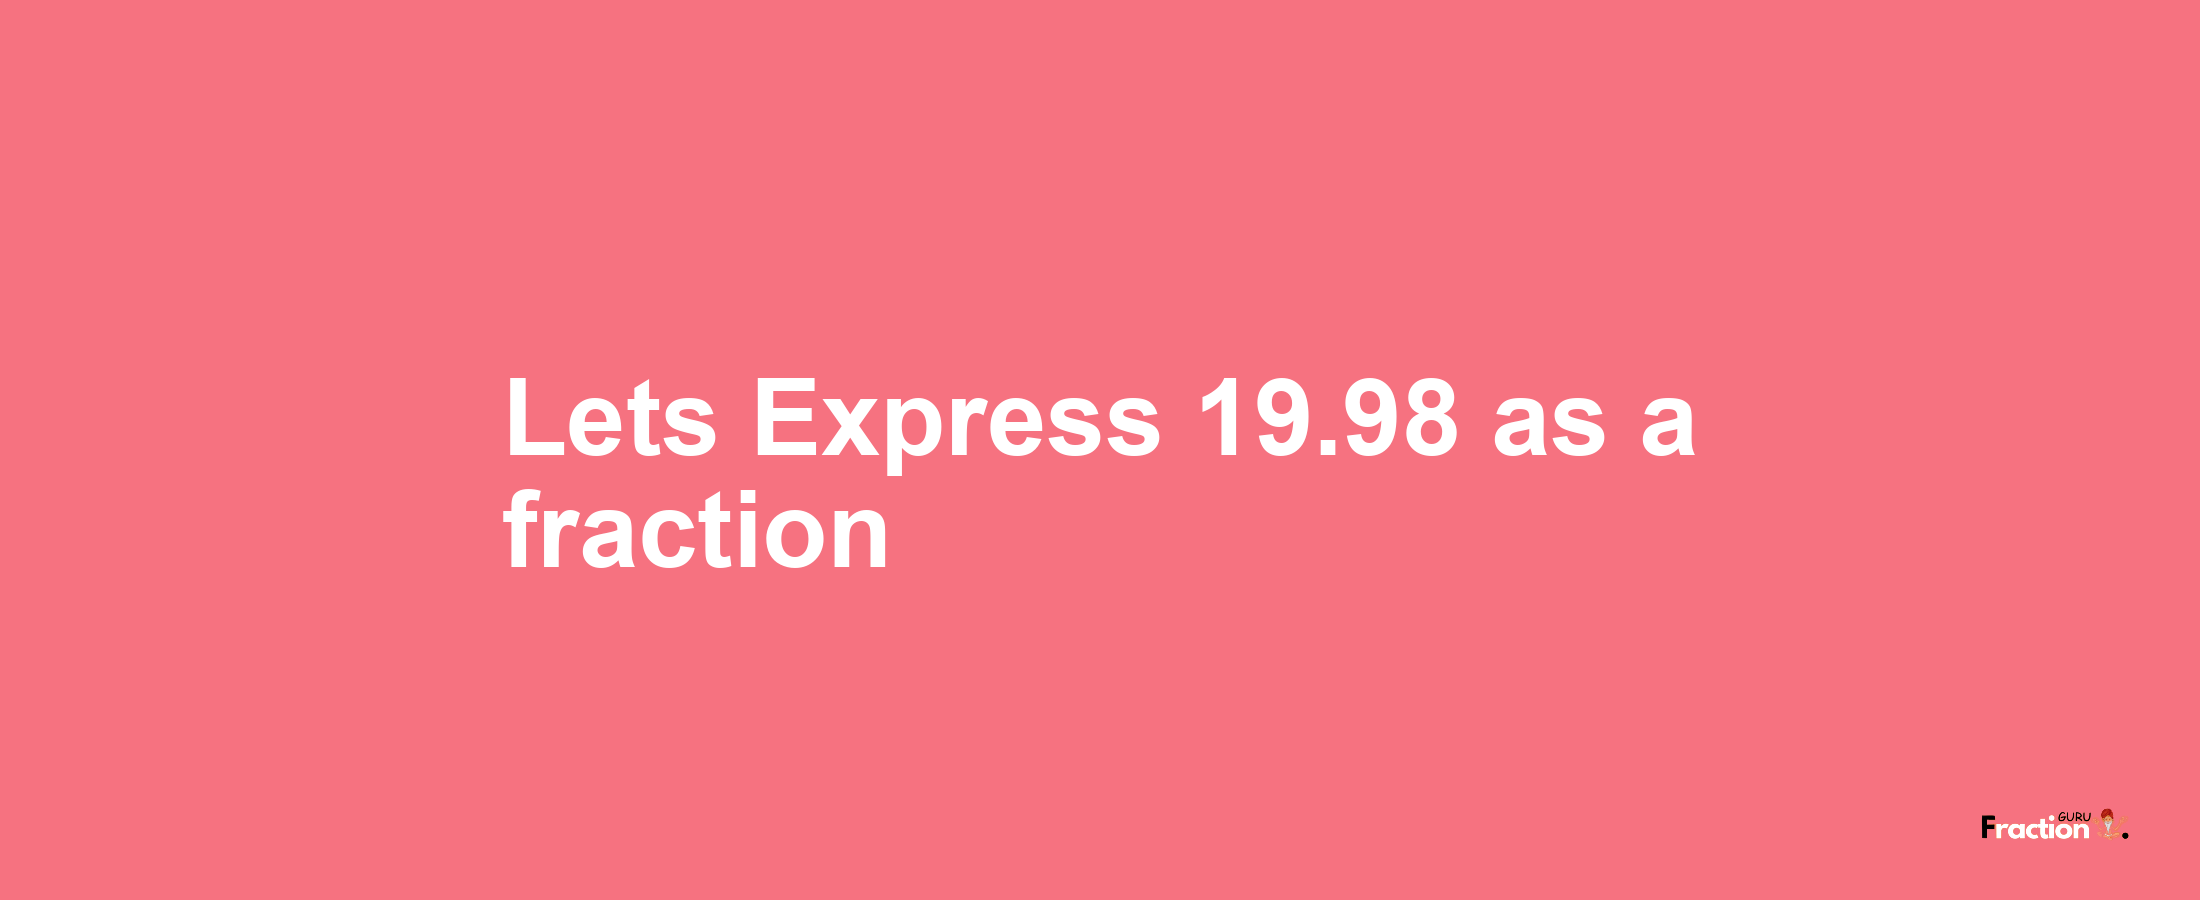 Lets Express 19.98 as afraction